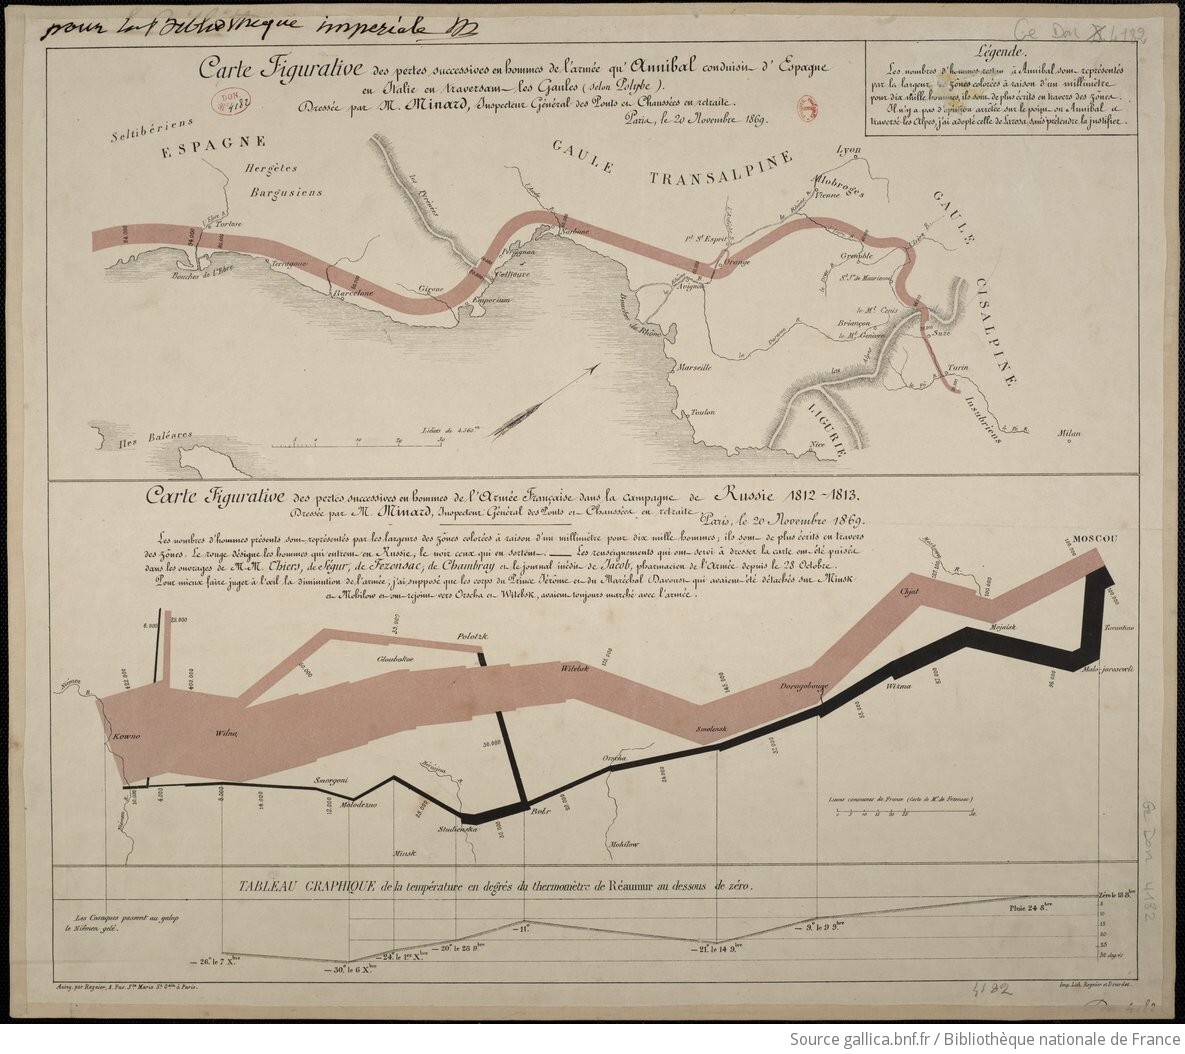 A line graph by Charles Minard inspired by Playfair. The graph’s descriptive text is in French. The title translates to “the losses of the French army in the Russian campaign from 1812-1813.” Two thick, jagged horizontal lines dominate the graph. A beige line is thickest and top-most on the graph, decreasing in thickness as the line moves right, indicating movement across Russia. Underneath the beige line, a black line decreases in thickness as the line moves left, indicating retreating movement from Russia by Napoleon’s army. Both lines hit various peaks and valleys, but only intersect at “Polotsk.”